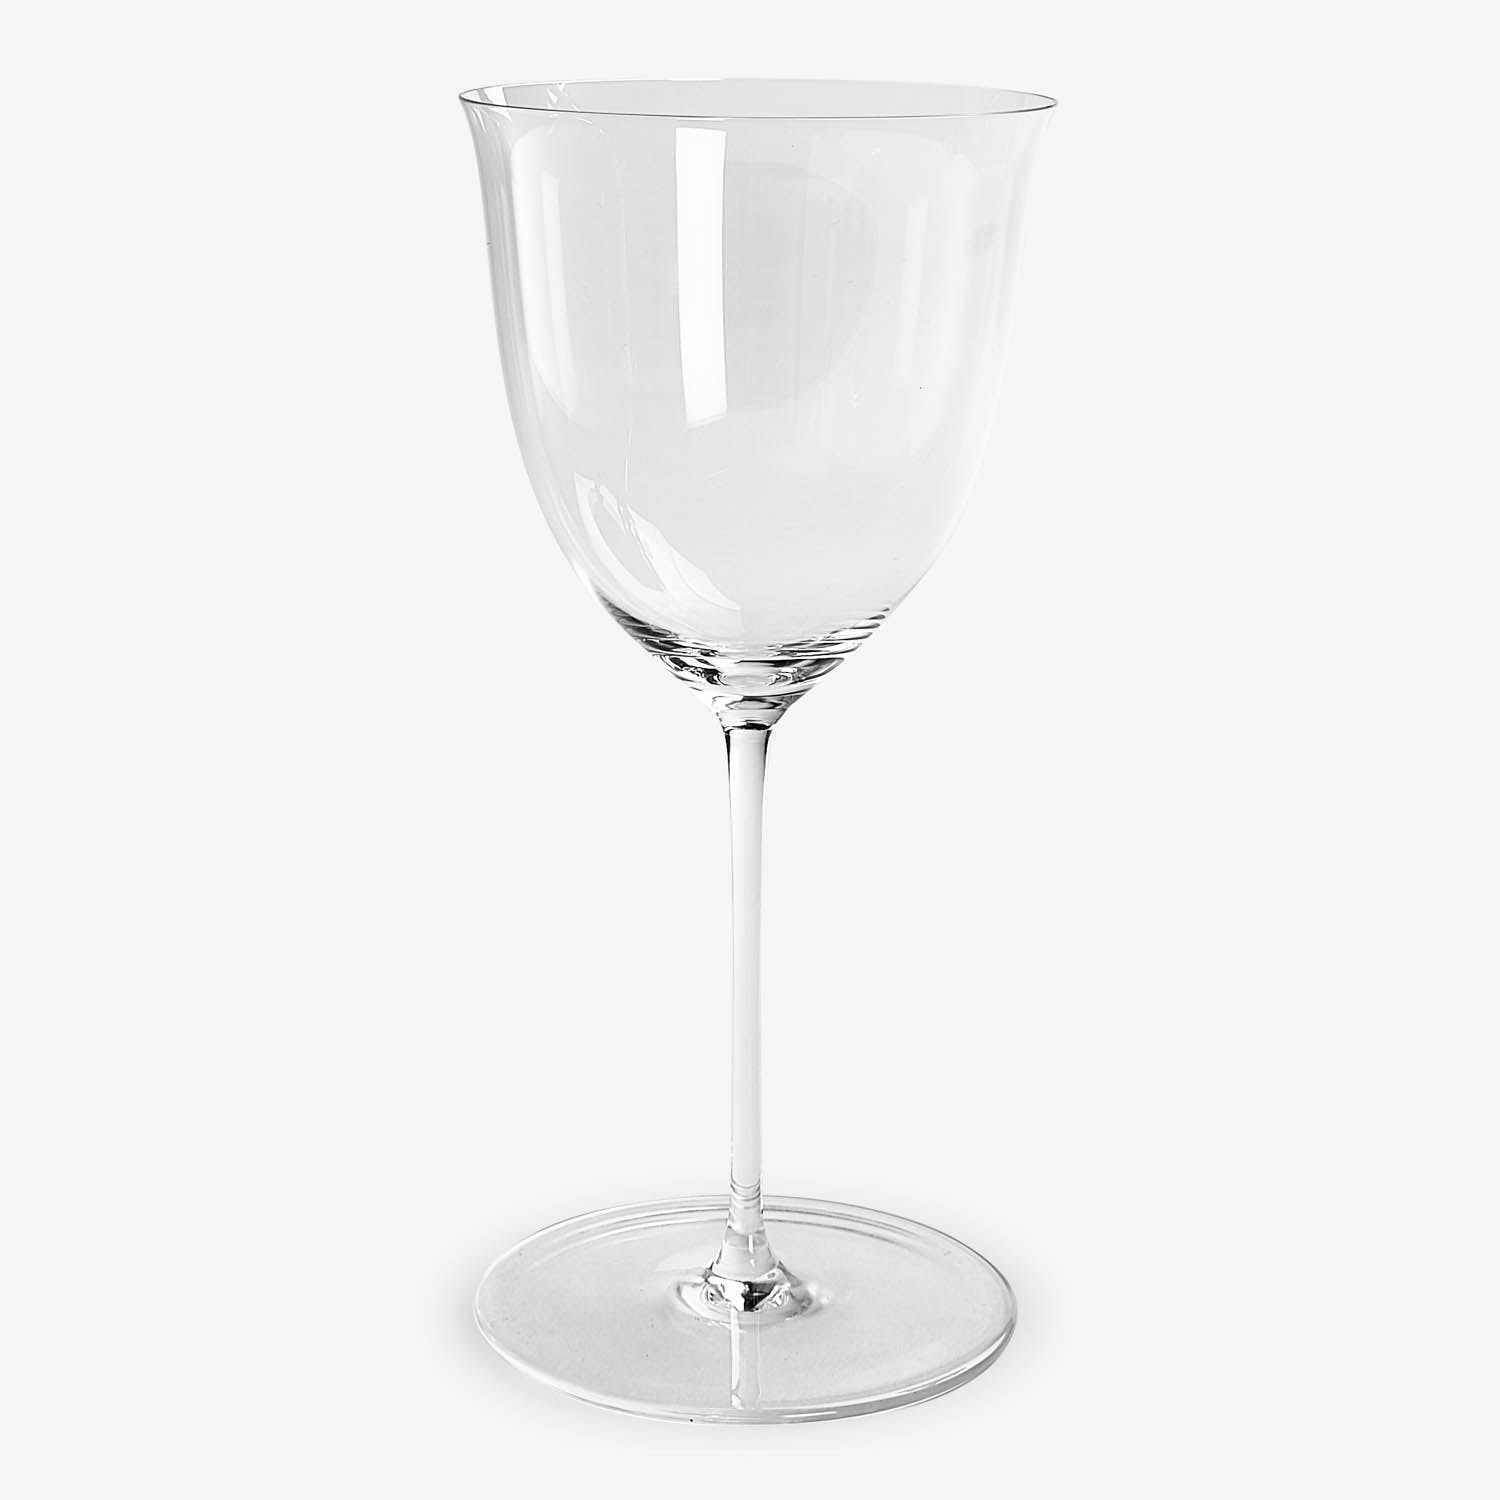 Close-up of a sleek, stemmed wine glass with glossy texture.